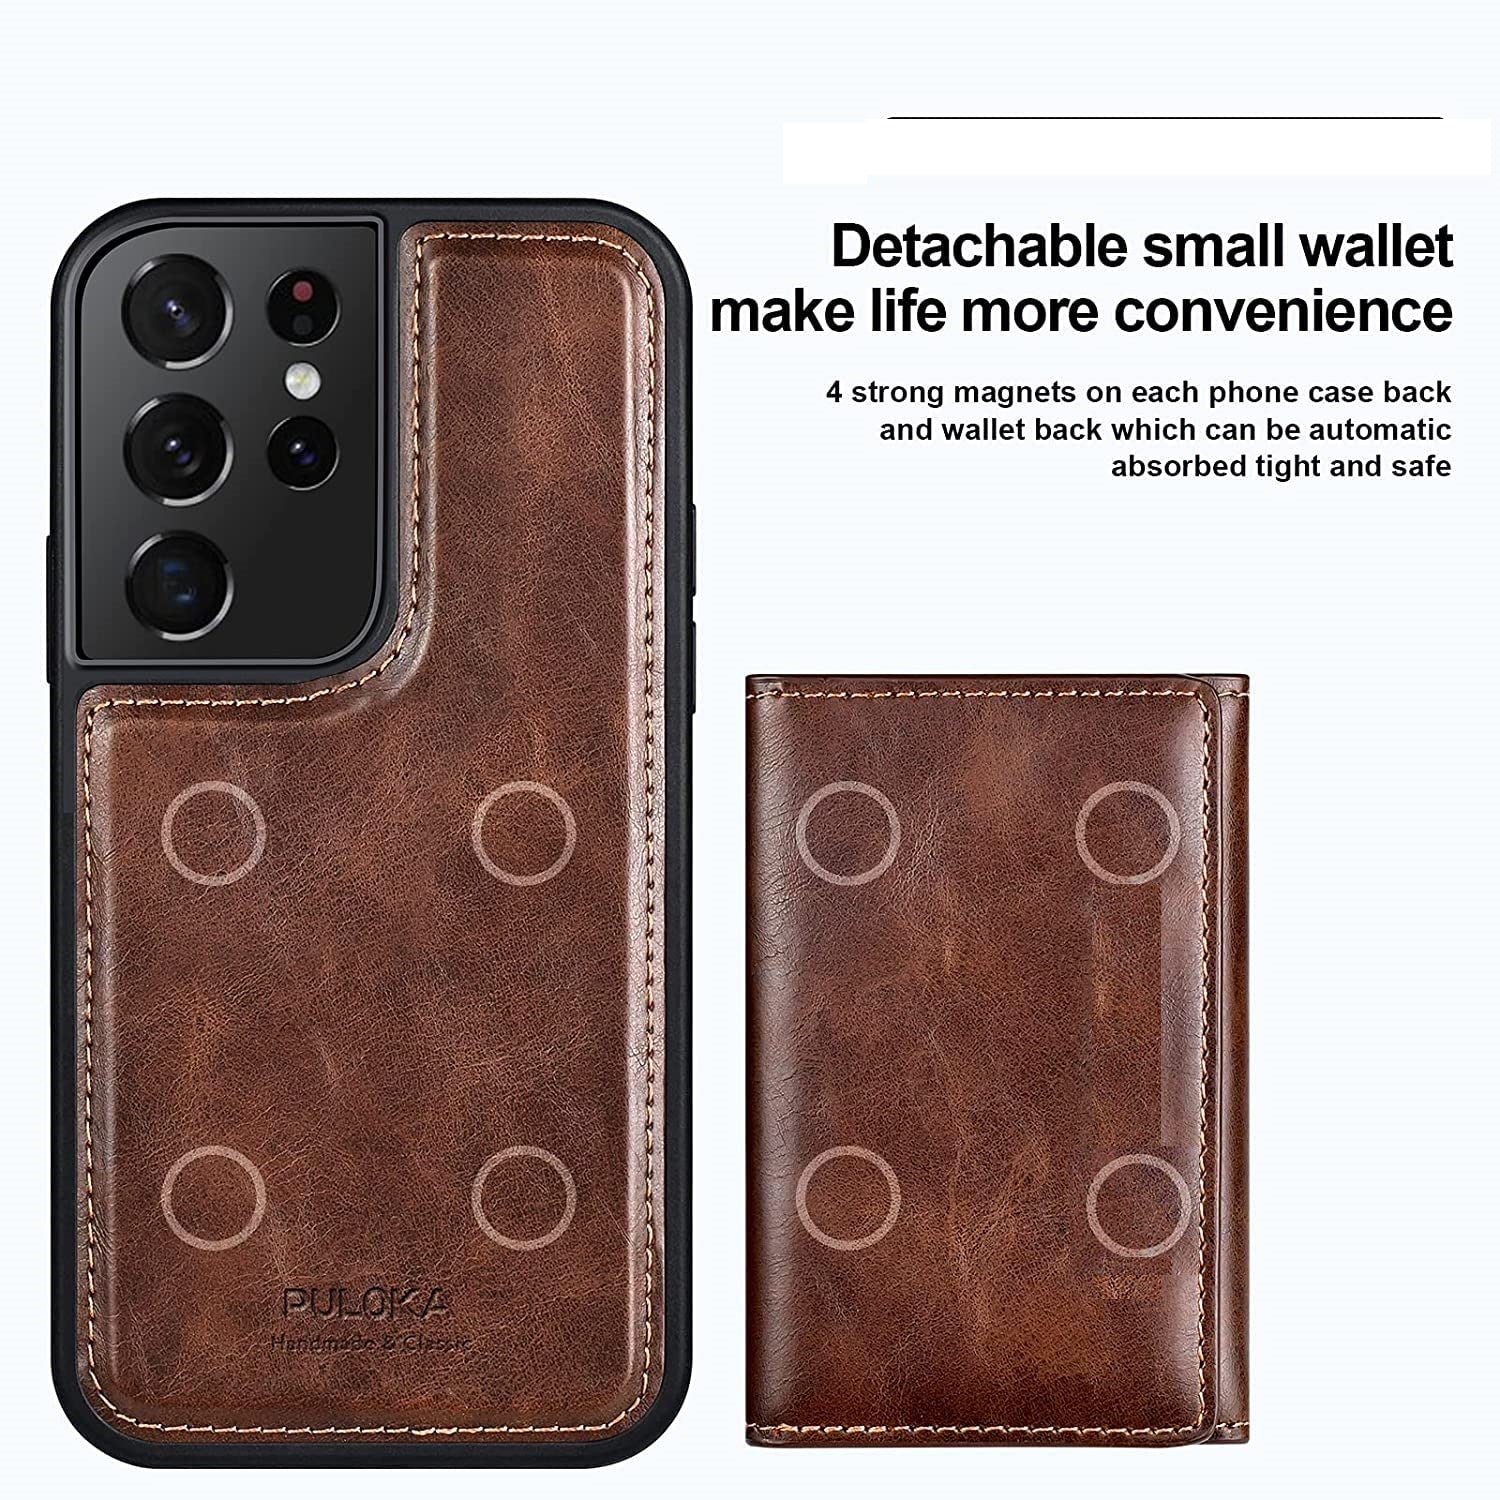 Samsung Galaxy S22 Ultra Premium Quality New Design Wallet Leather case